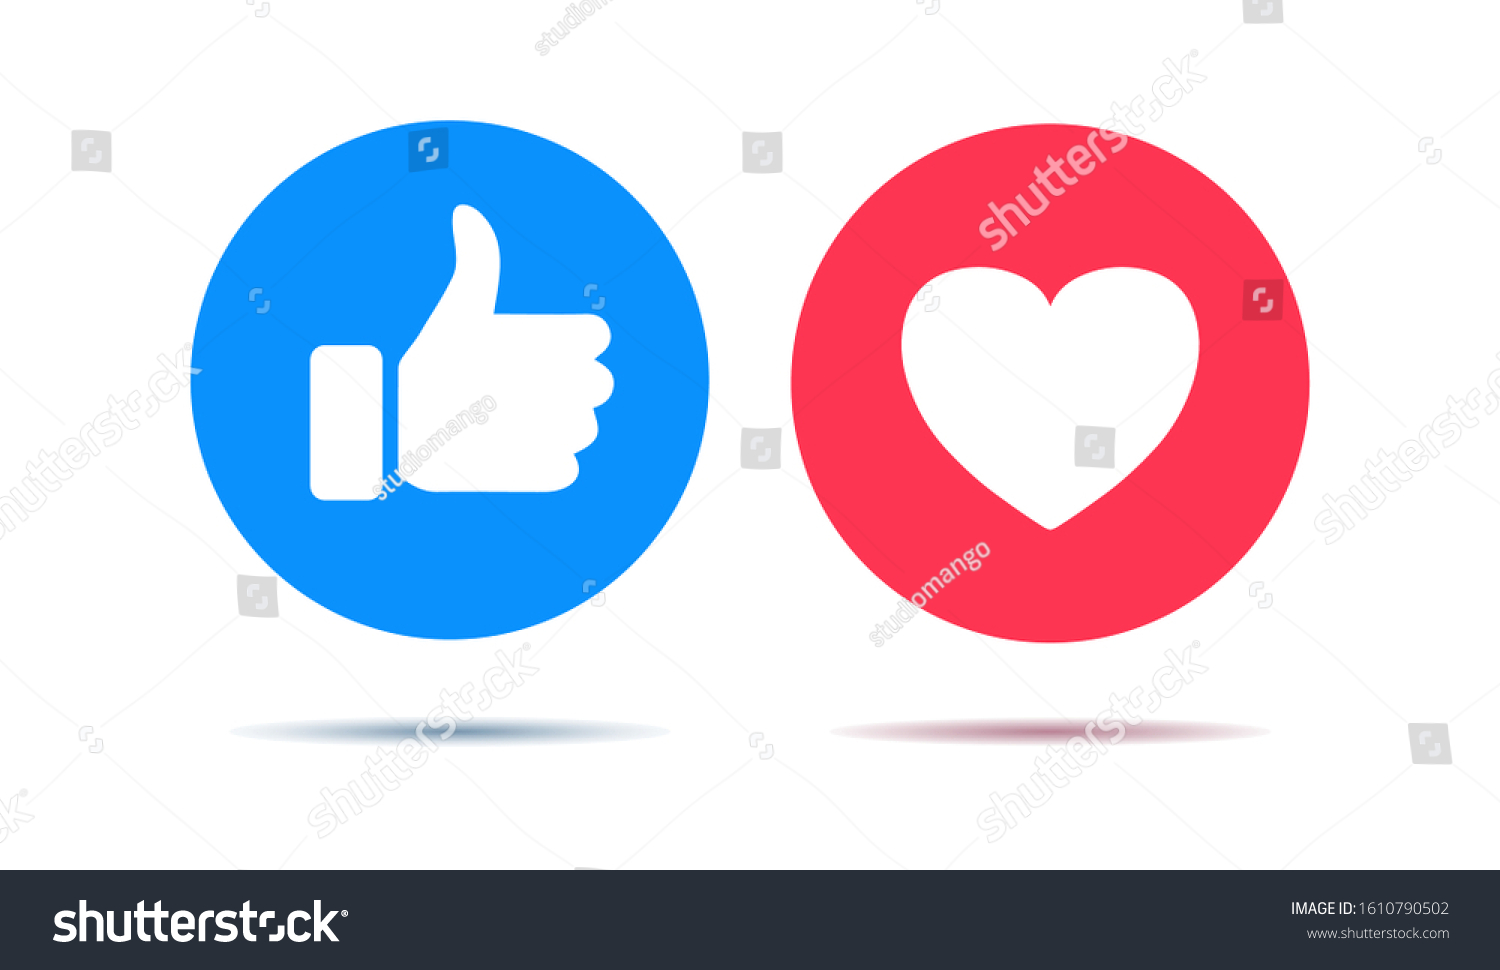 SVG of Thumbs up and hearts isolated on a white background. Vector illustration. svg